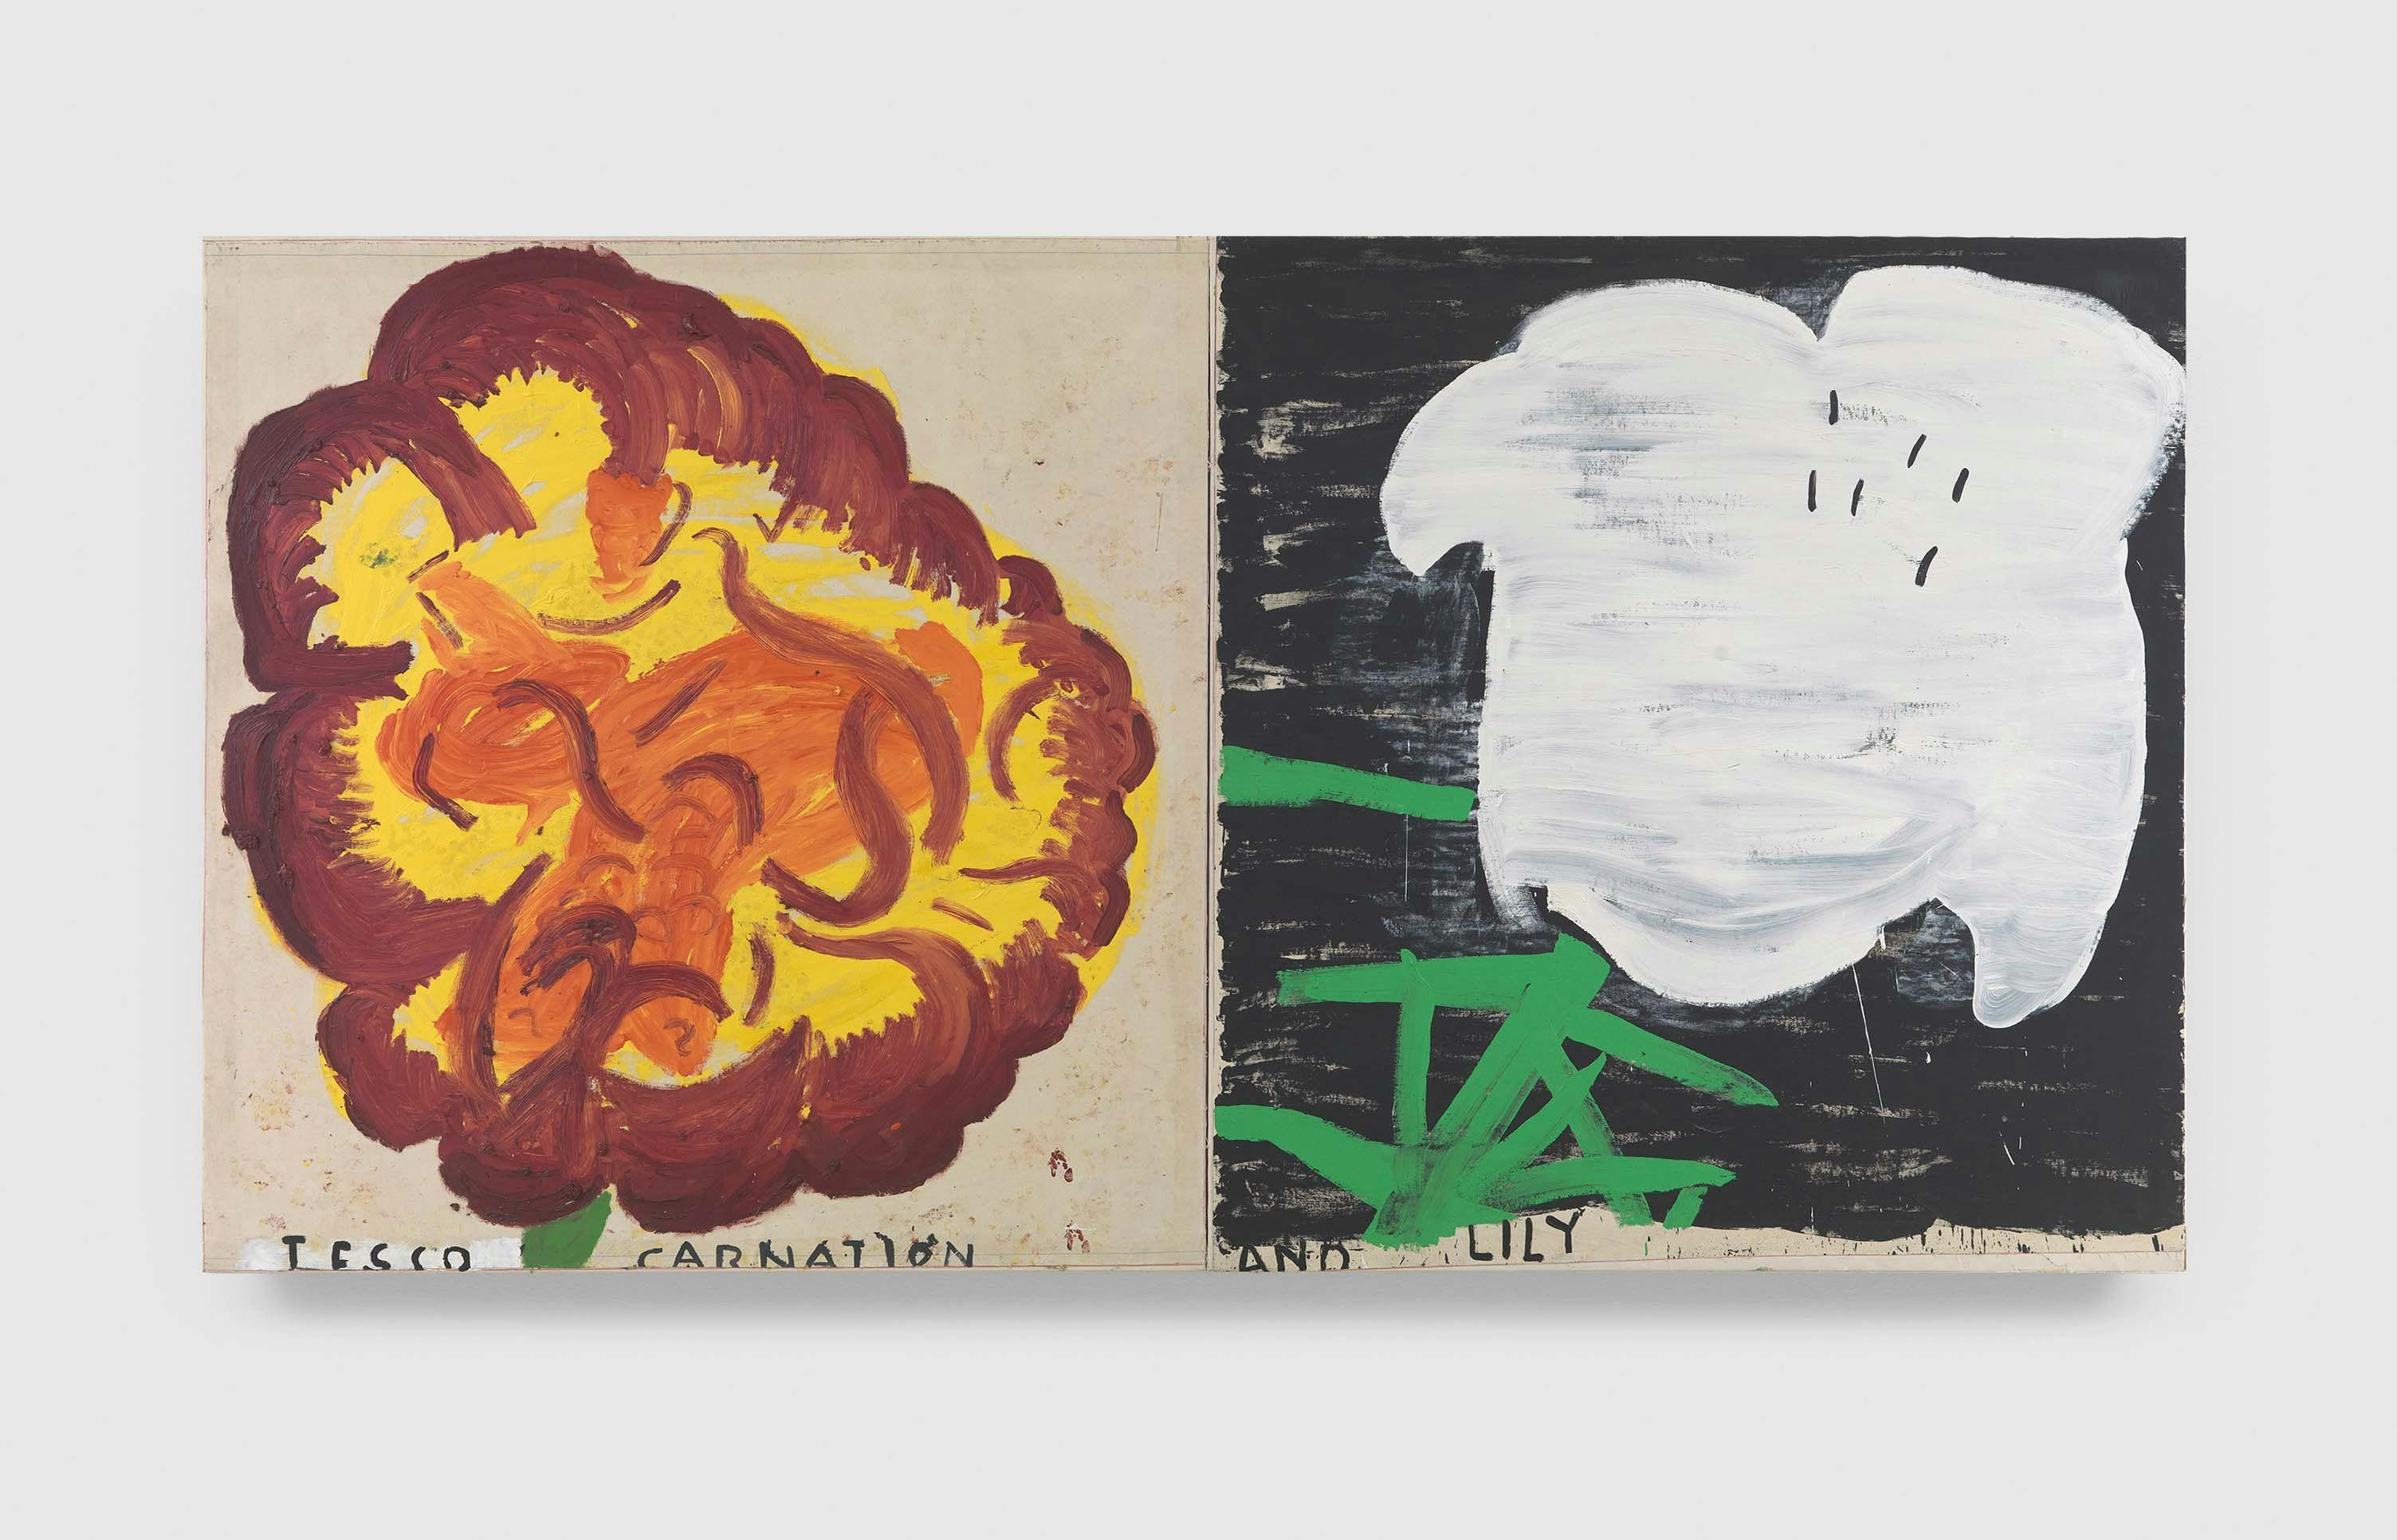 A painting by Rose Wylie, titled Flowerpiece, Carnation and Lily, dated 2010.